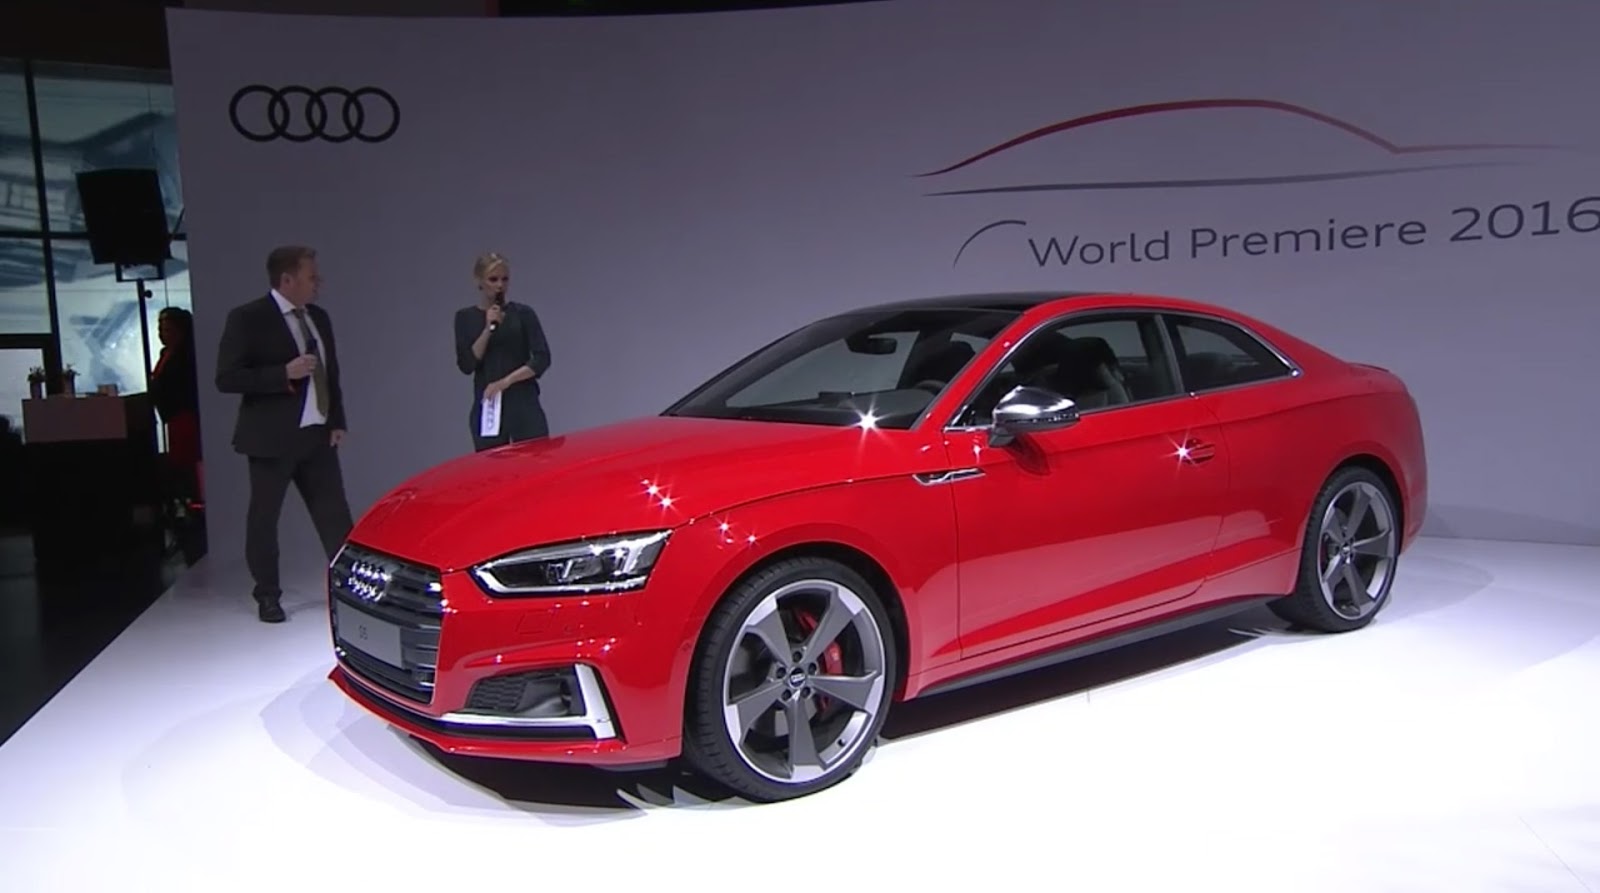 Watch The World Premiere Of Audi's New 2017 A5 Coupé [First Photos